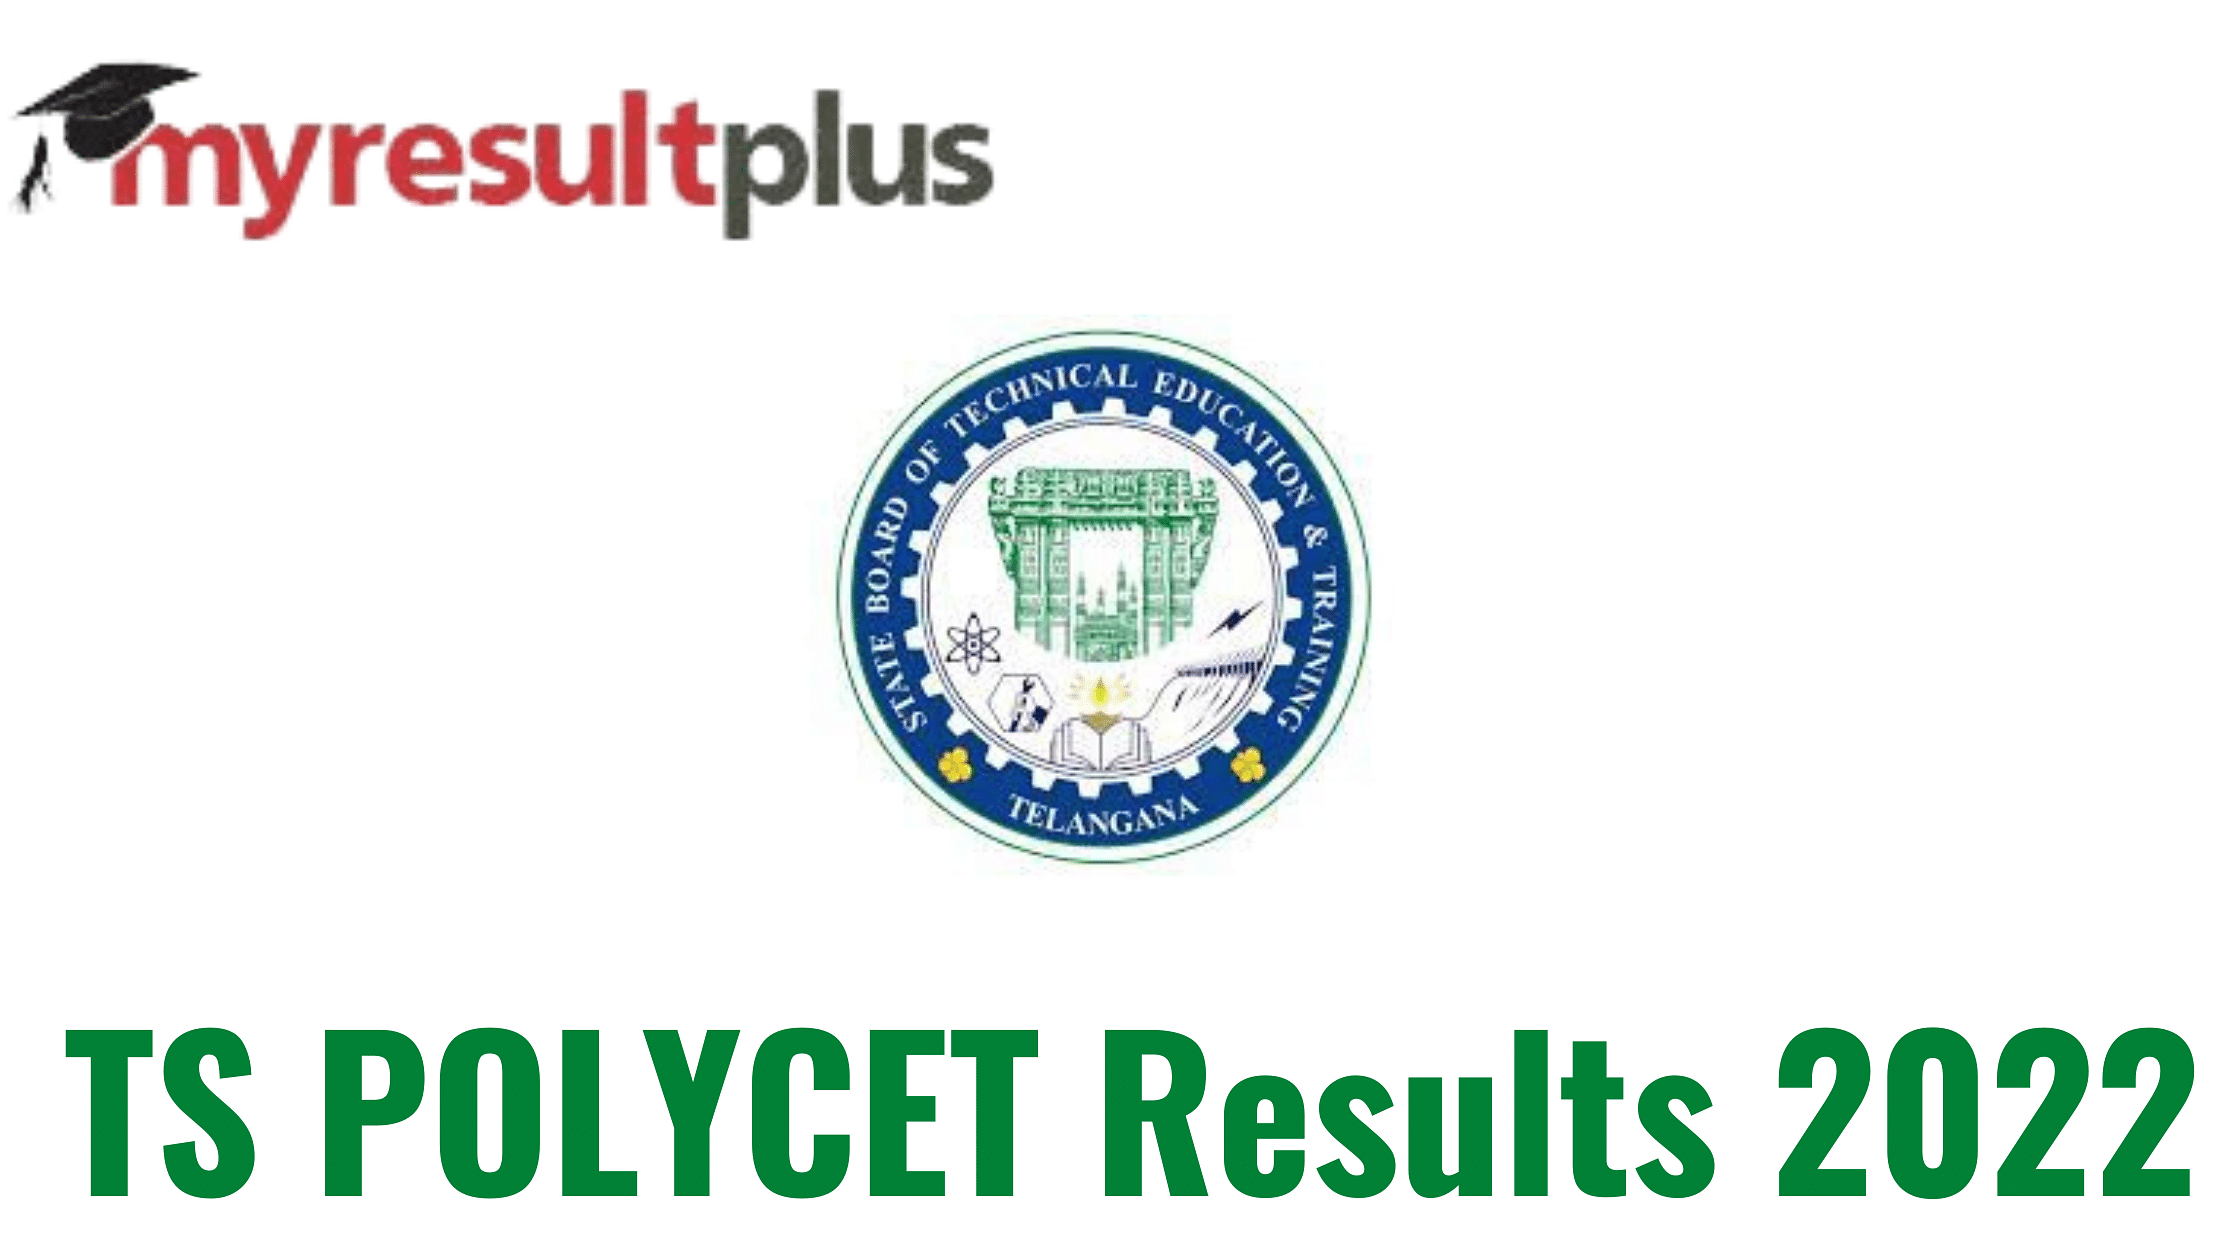 TS POLYCET Results 2022 Announced, Direct Link to Download Rank Card Here